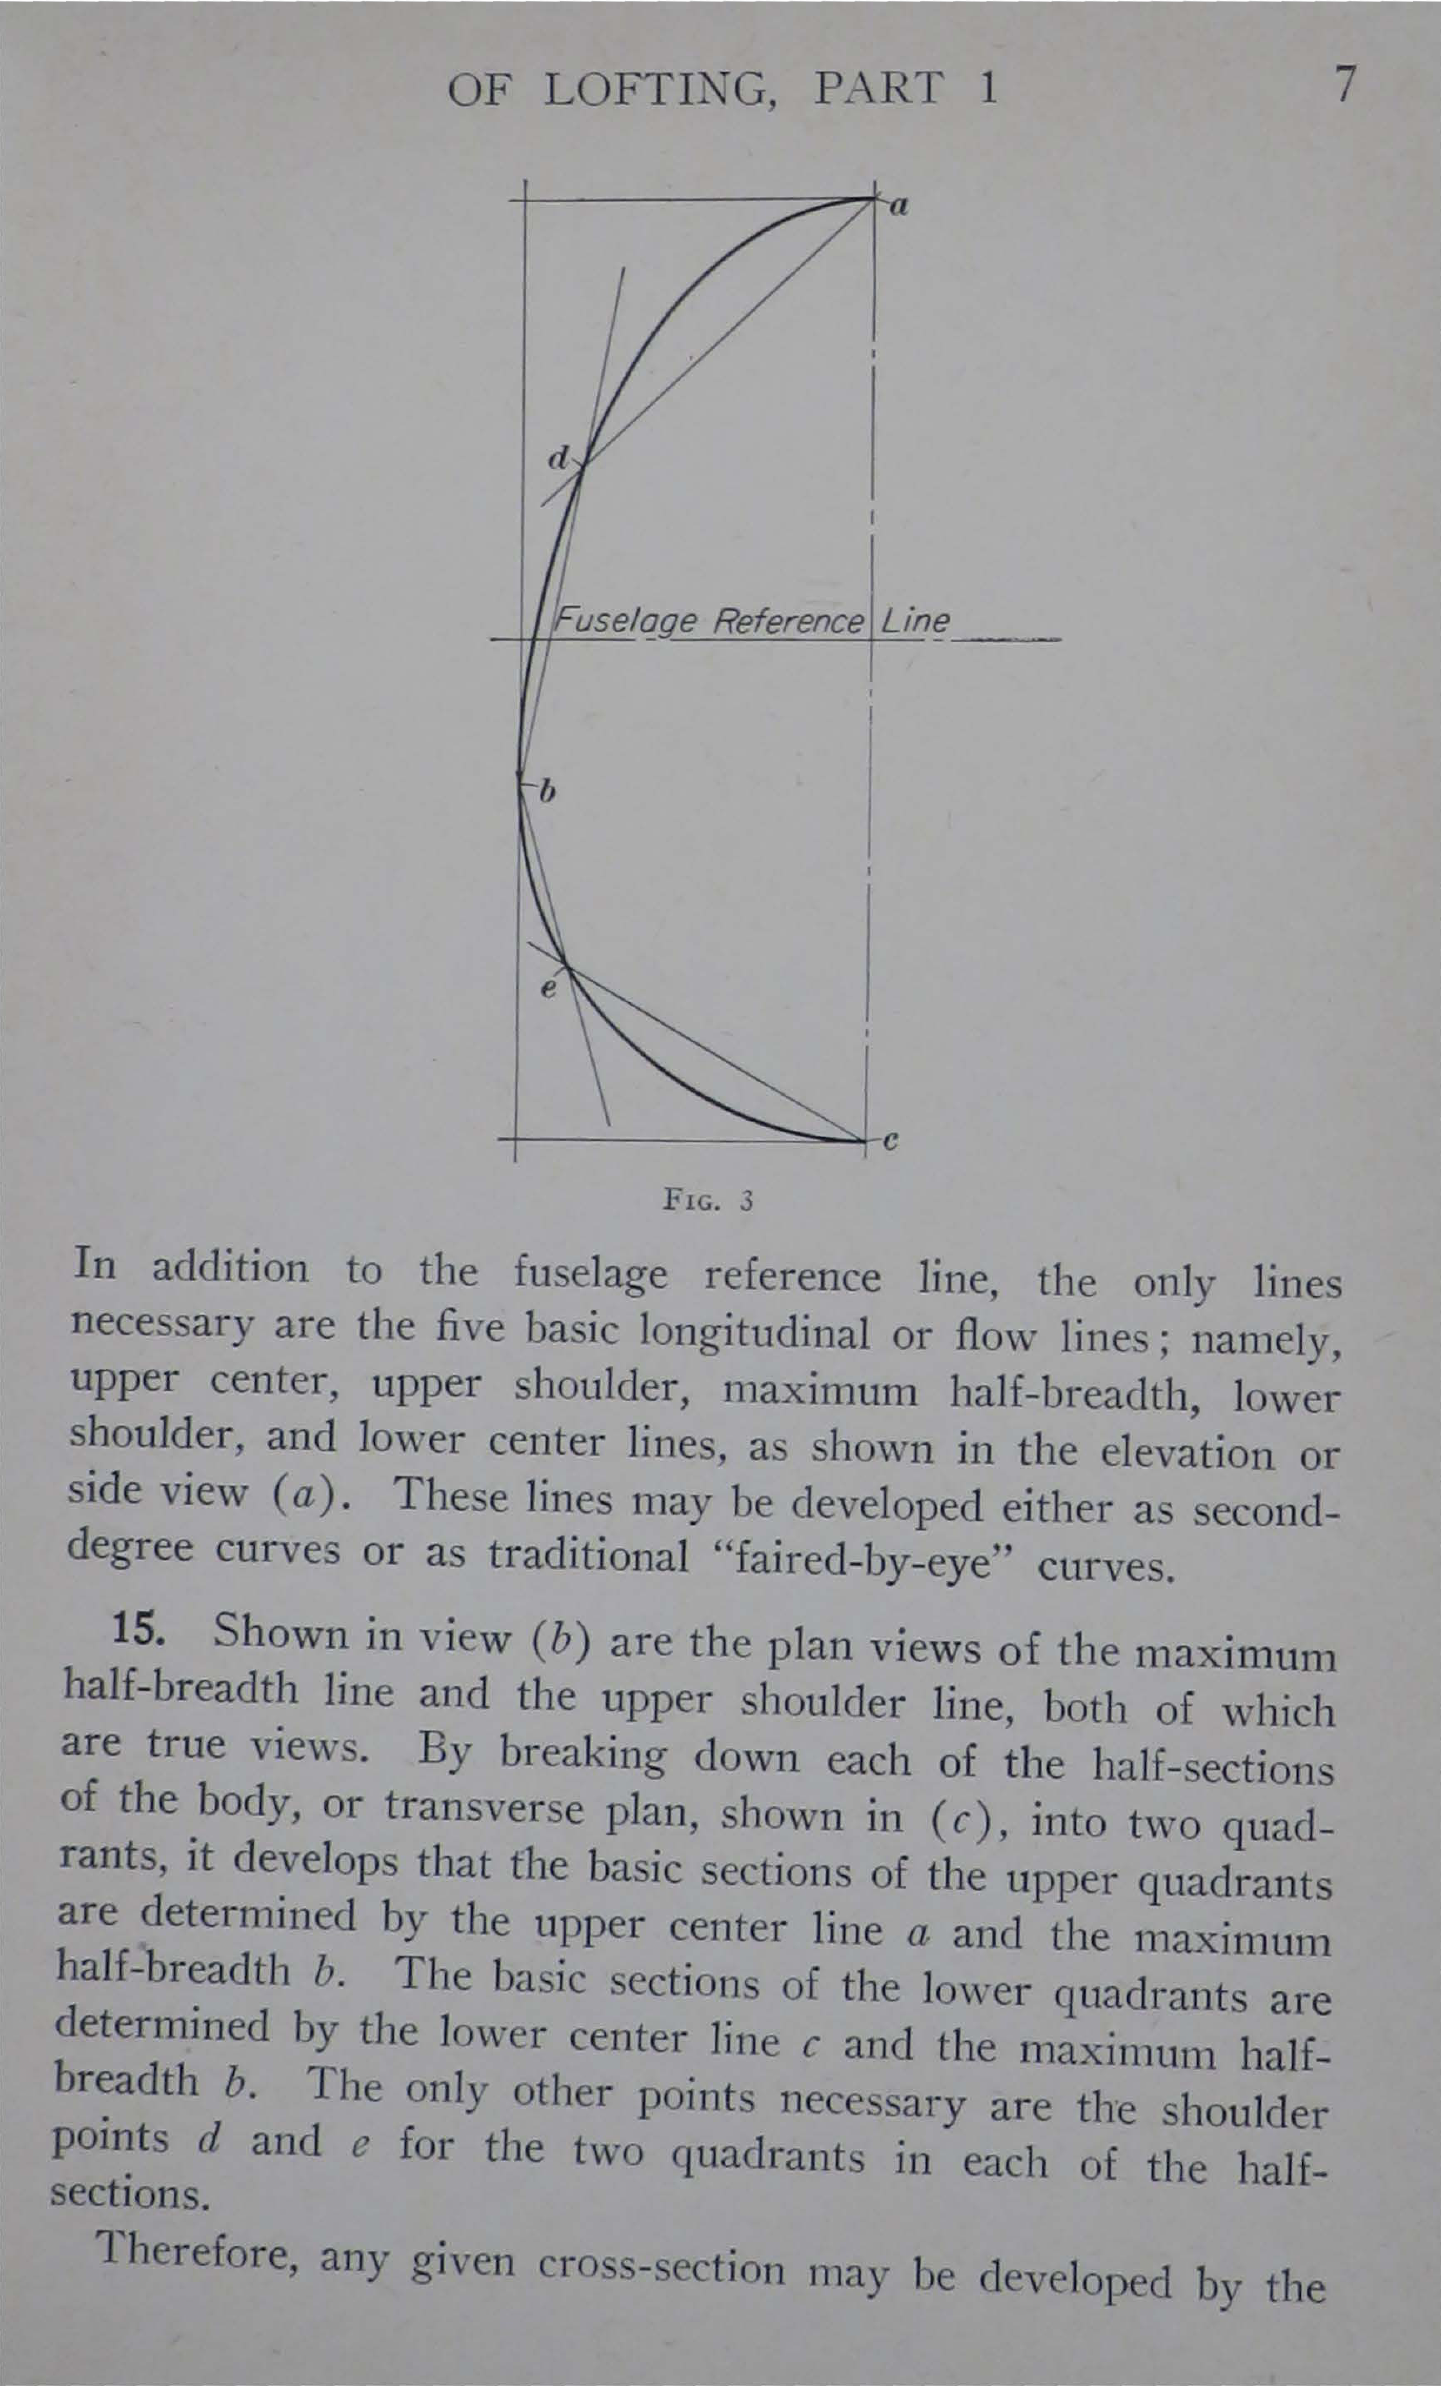 Sample page 9 from AirCorps Library document: Mathematical Technique of Lofting - Part 1 - Bureau of Aeronautics, 